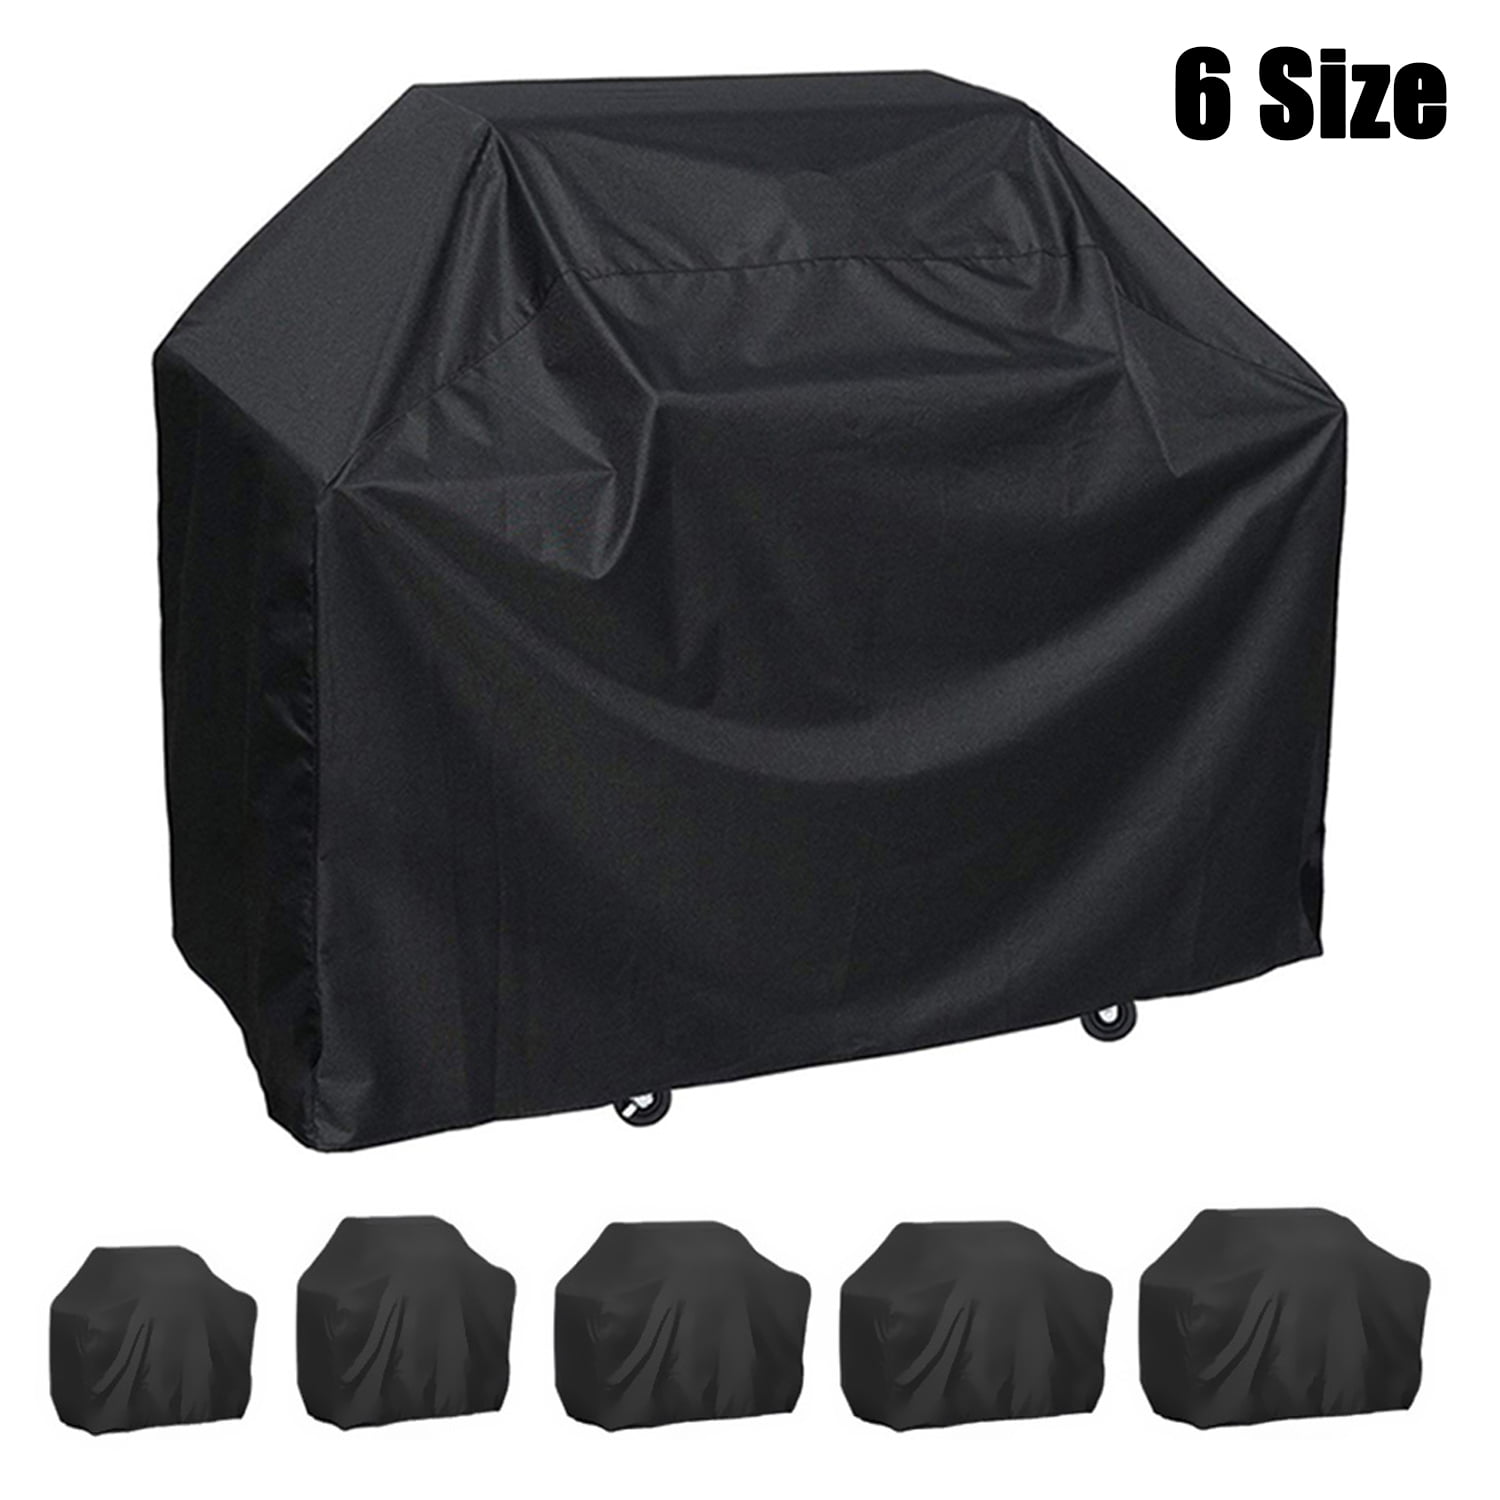 75" L XL 67" Protection for Gas BBQ Grill Cover Waterproof 57" XXL 